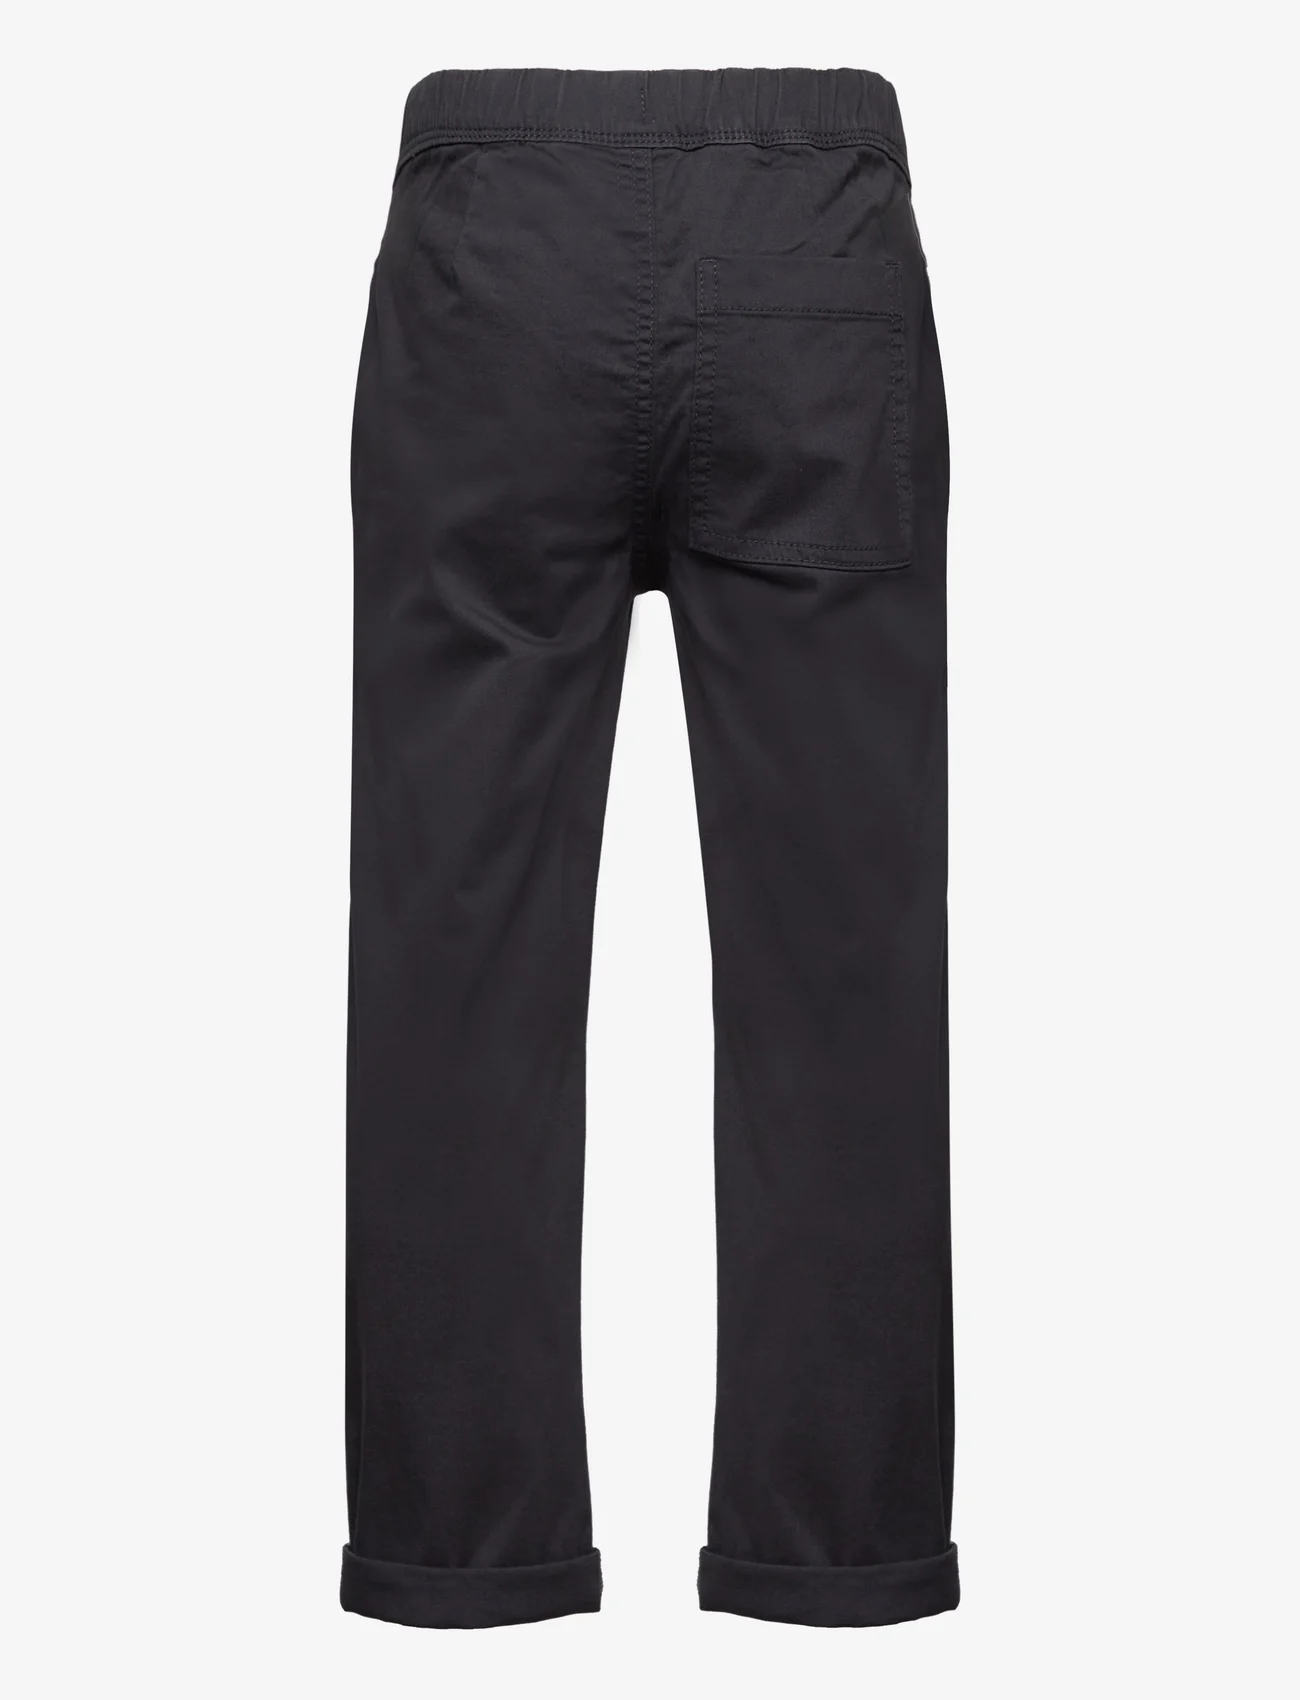 Tom Tailor - chino pants - sommerschnäppchen - coal grey - 1